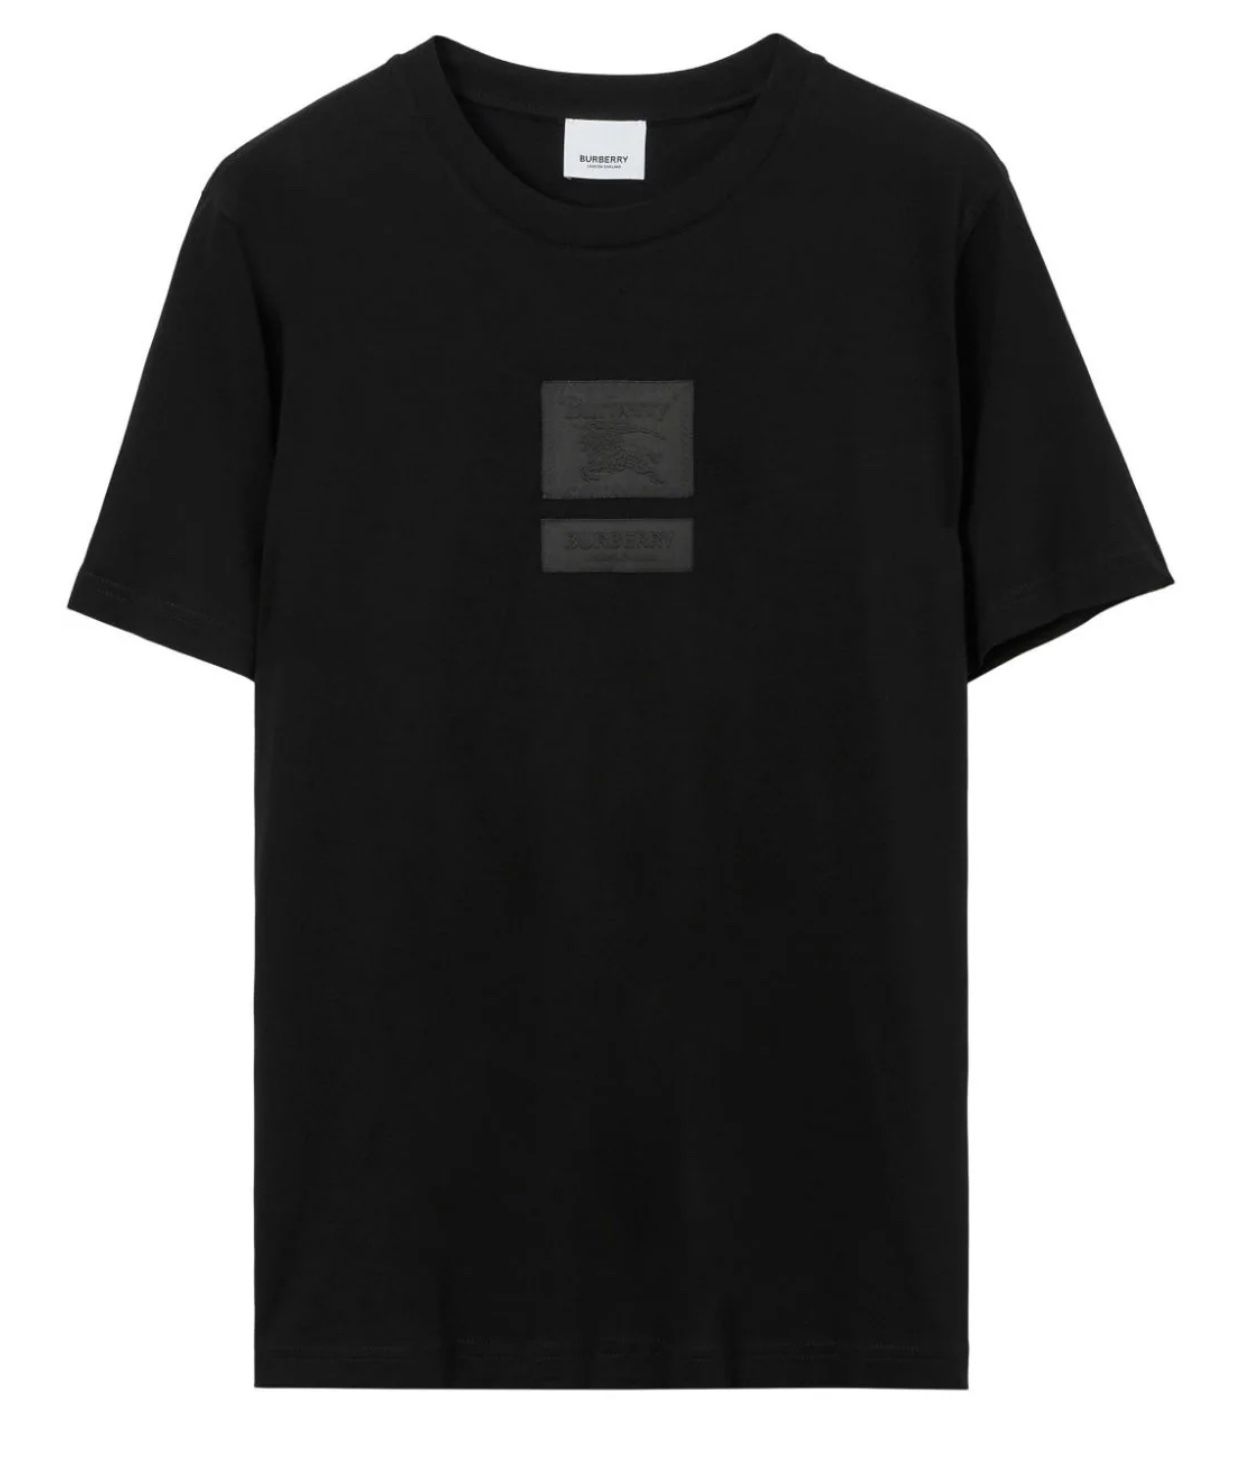 Burberry T Shirt All Sizes